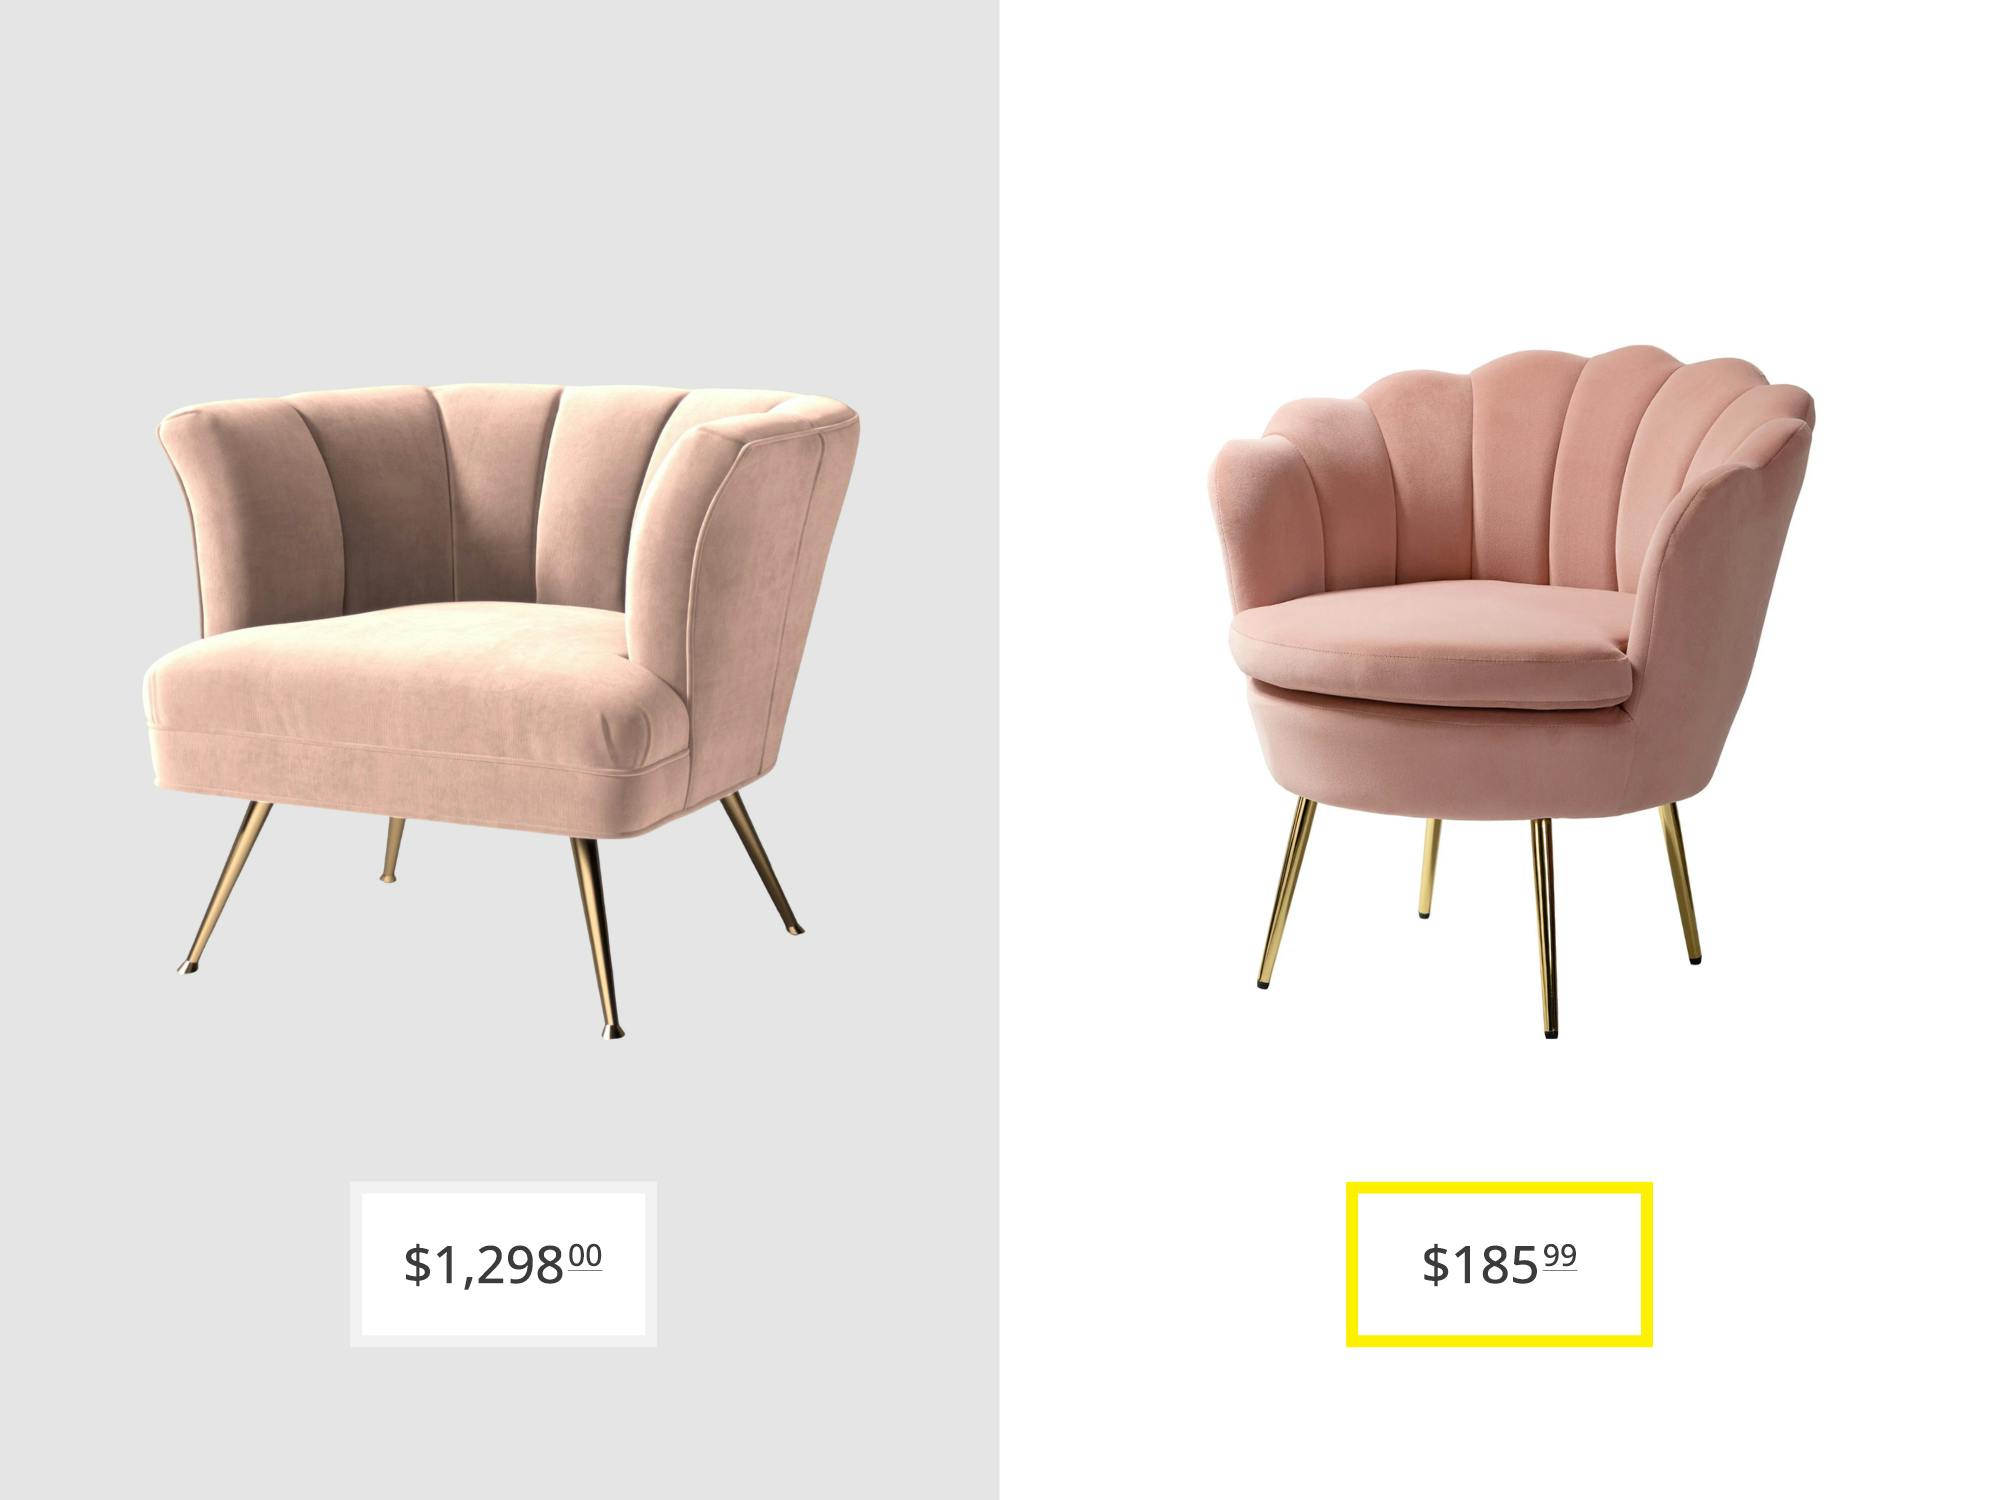 price comparison graphic with pink anthropologie tulip chair and hendrix upholstered barrel chair